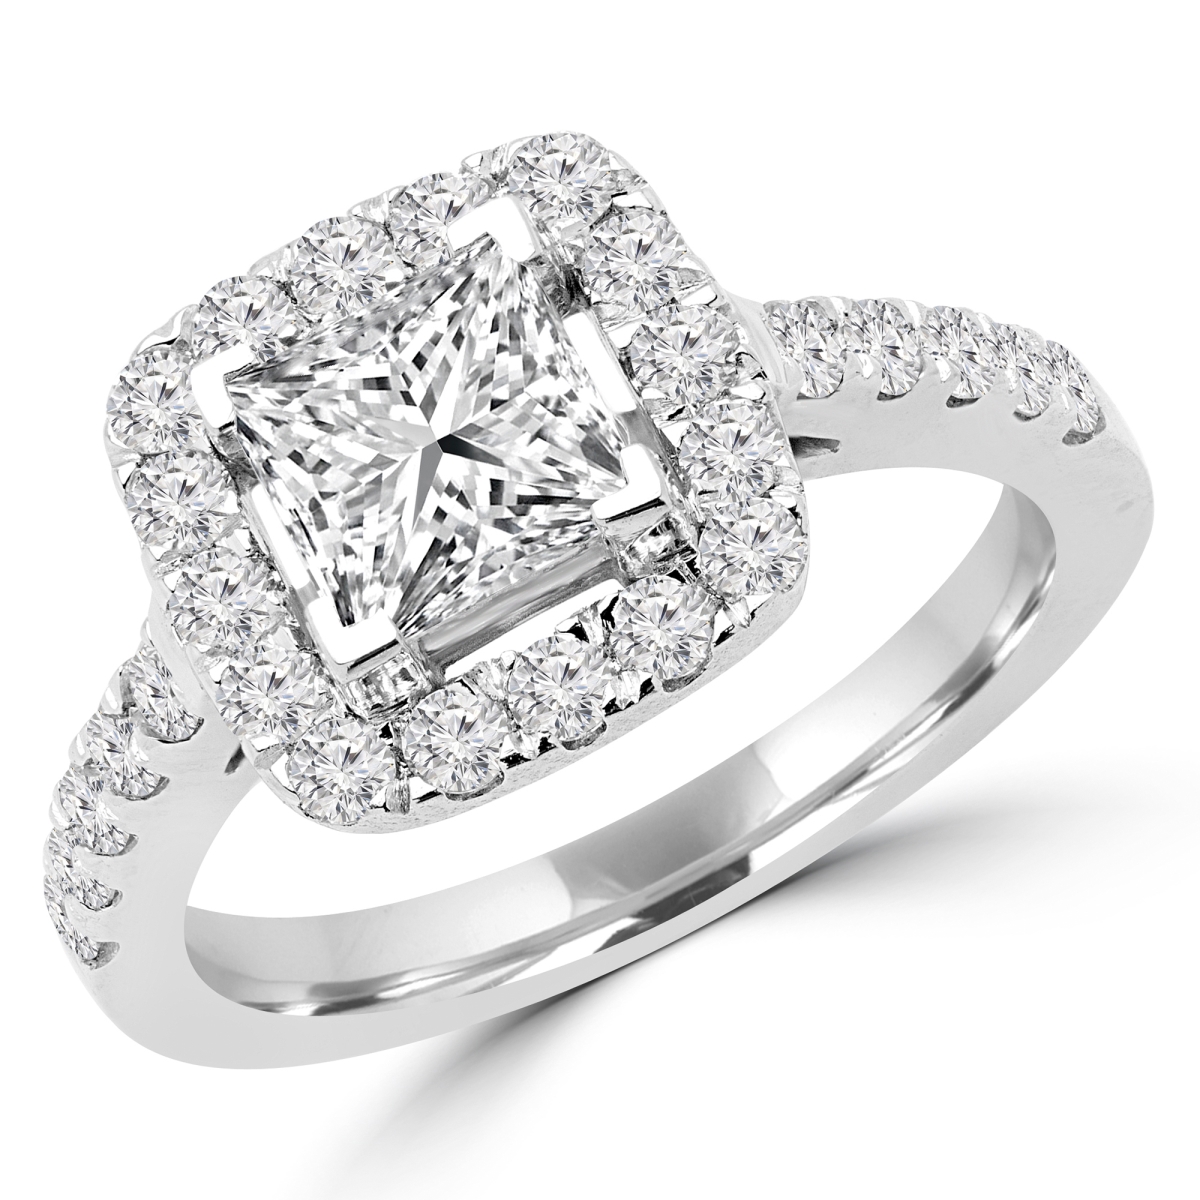 Picture of Majesty Diamonds MD180474-P 1.65 CTW Princess Diamond V-Prong Halo Engagement Ring in 14K White Gold